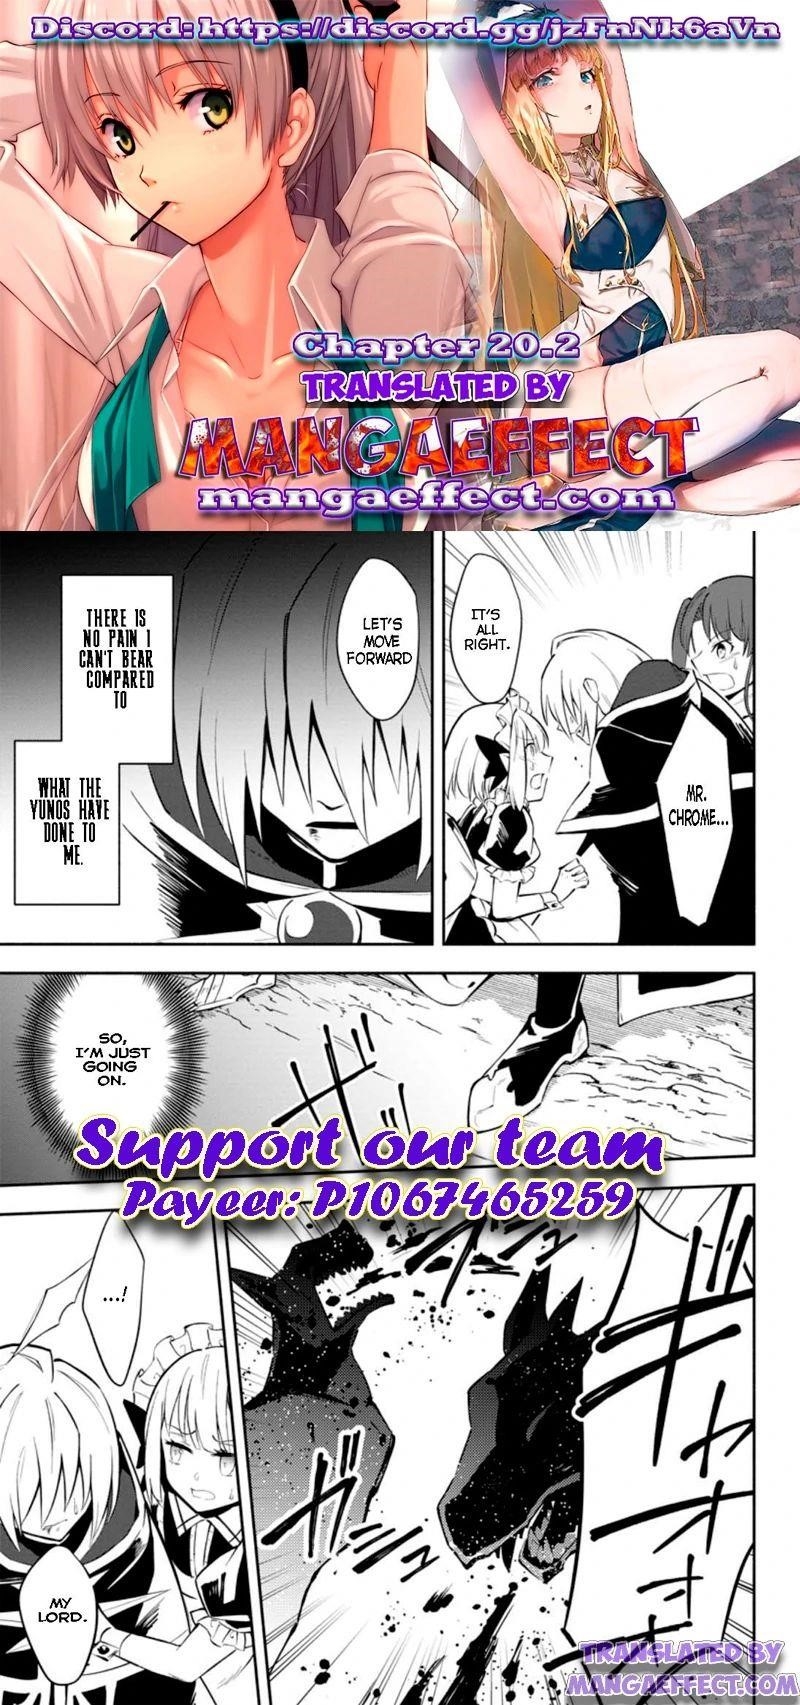 My Lover Was Stolen, And I Was Kicked Out Of The Hero’s Party, But I Awakened To The EX Skill “Fixed Damage” And Became Invincible. Now, Let’s Begin Some Revenge Chapter 20.2 - Page 1